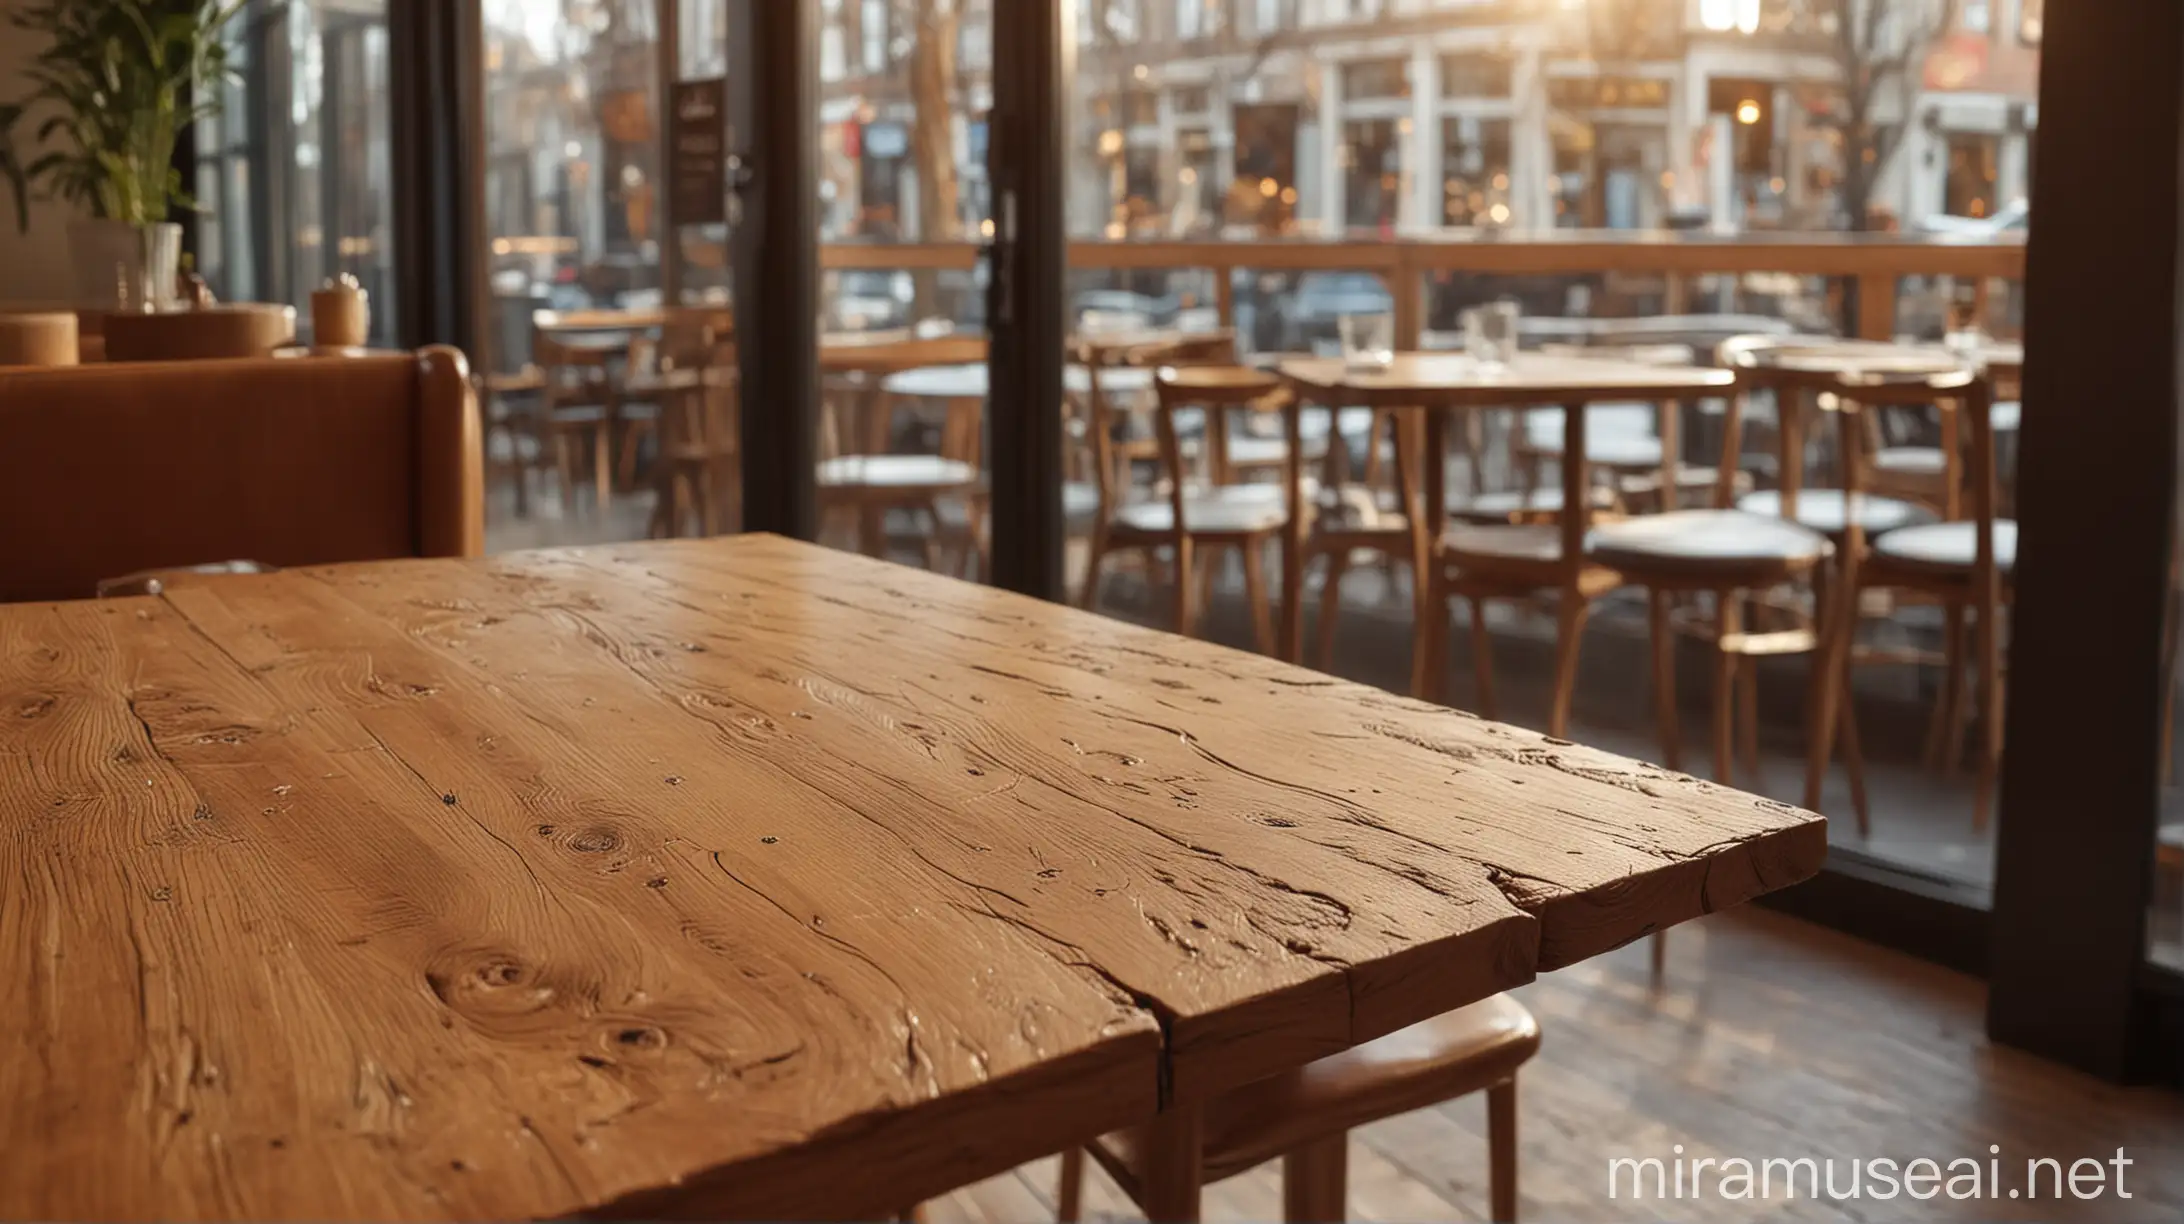 Warm and Inviting Wooden Table in Modern Cafe Interior